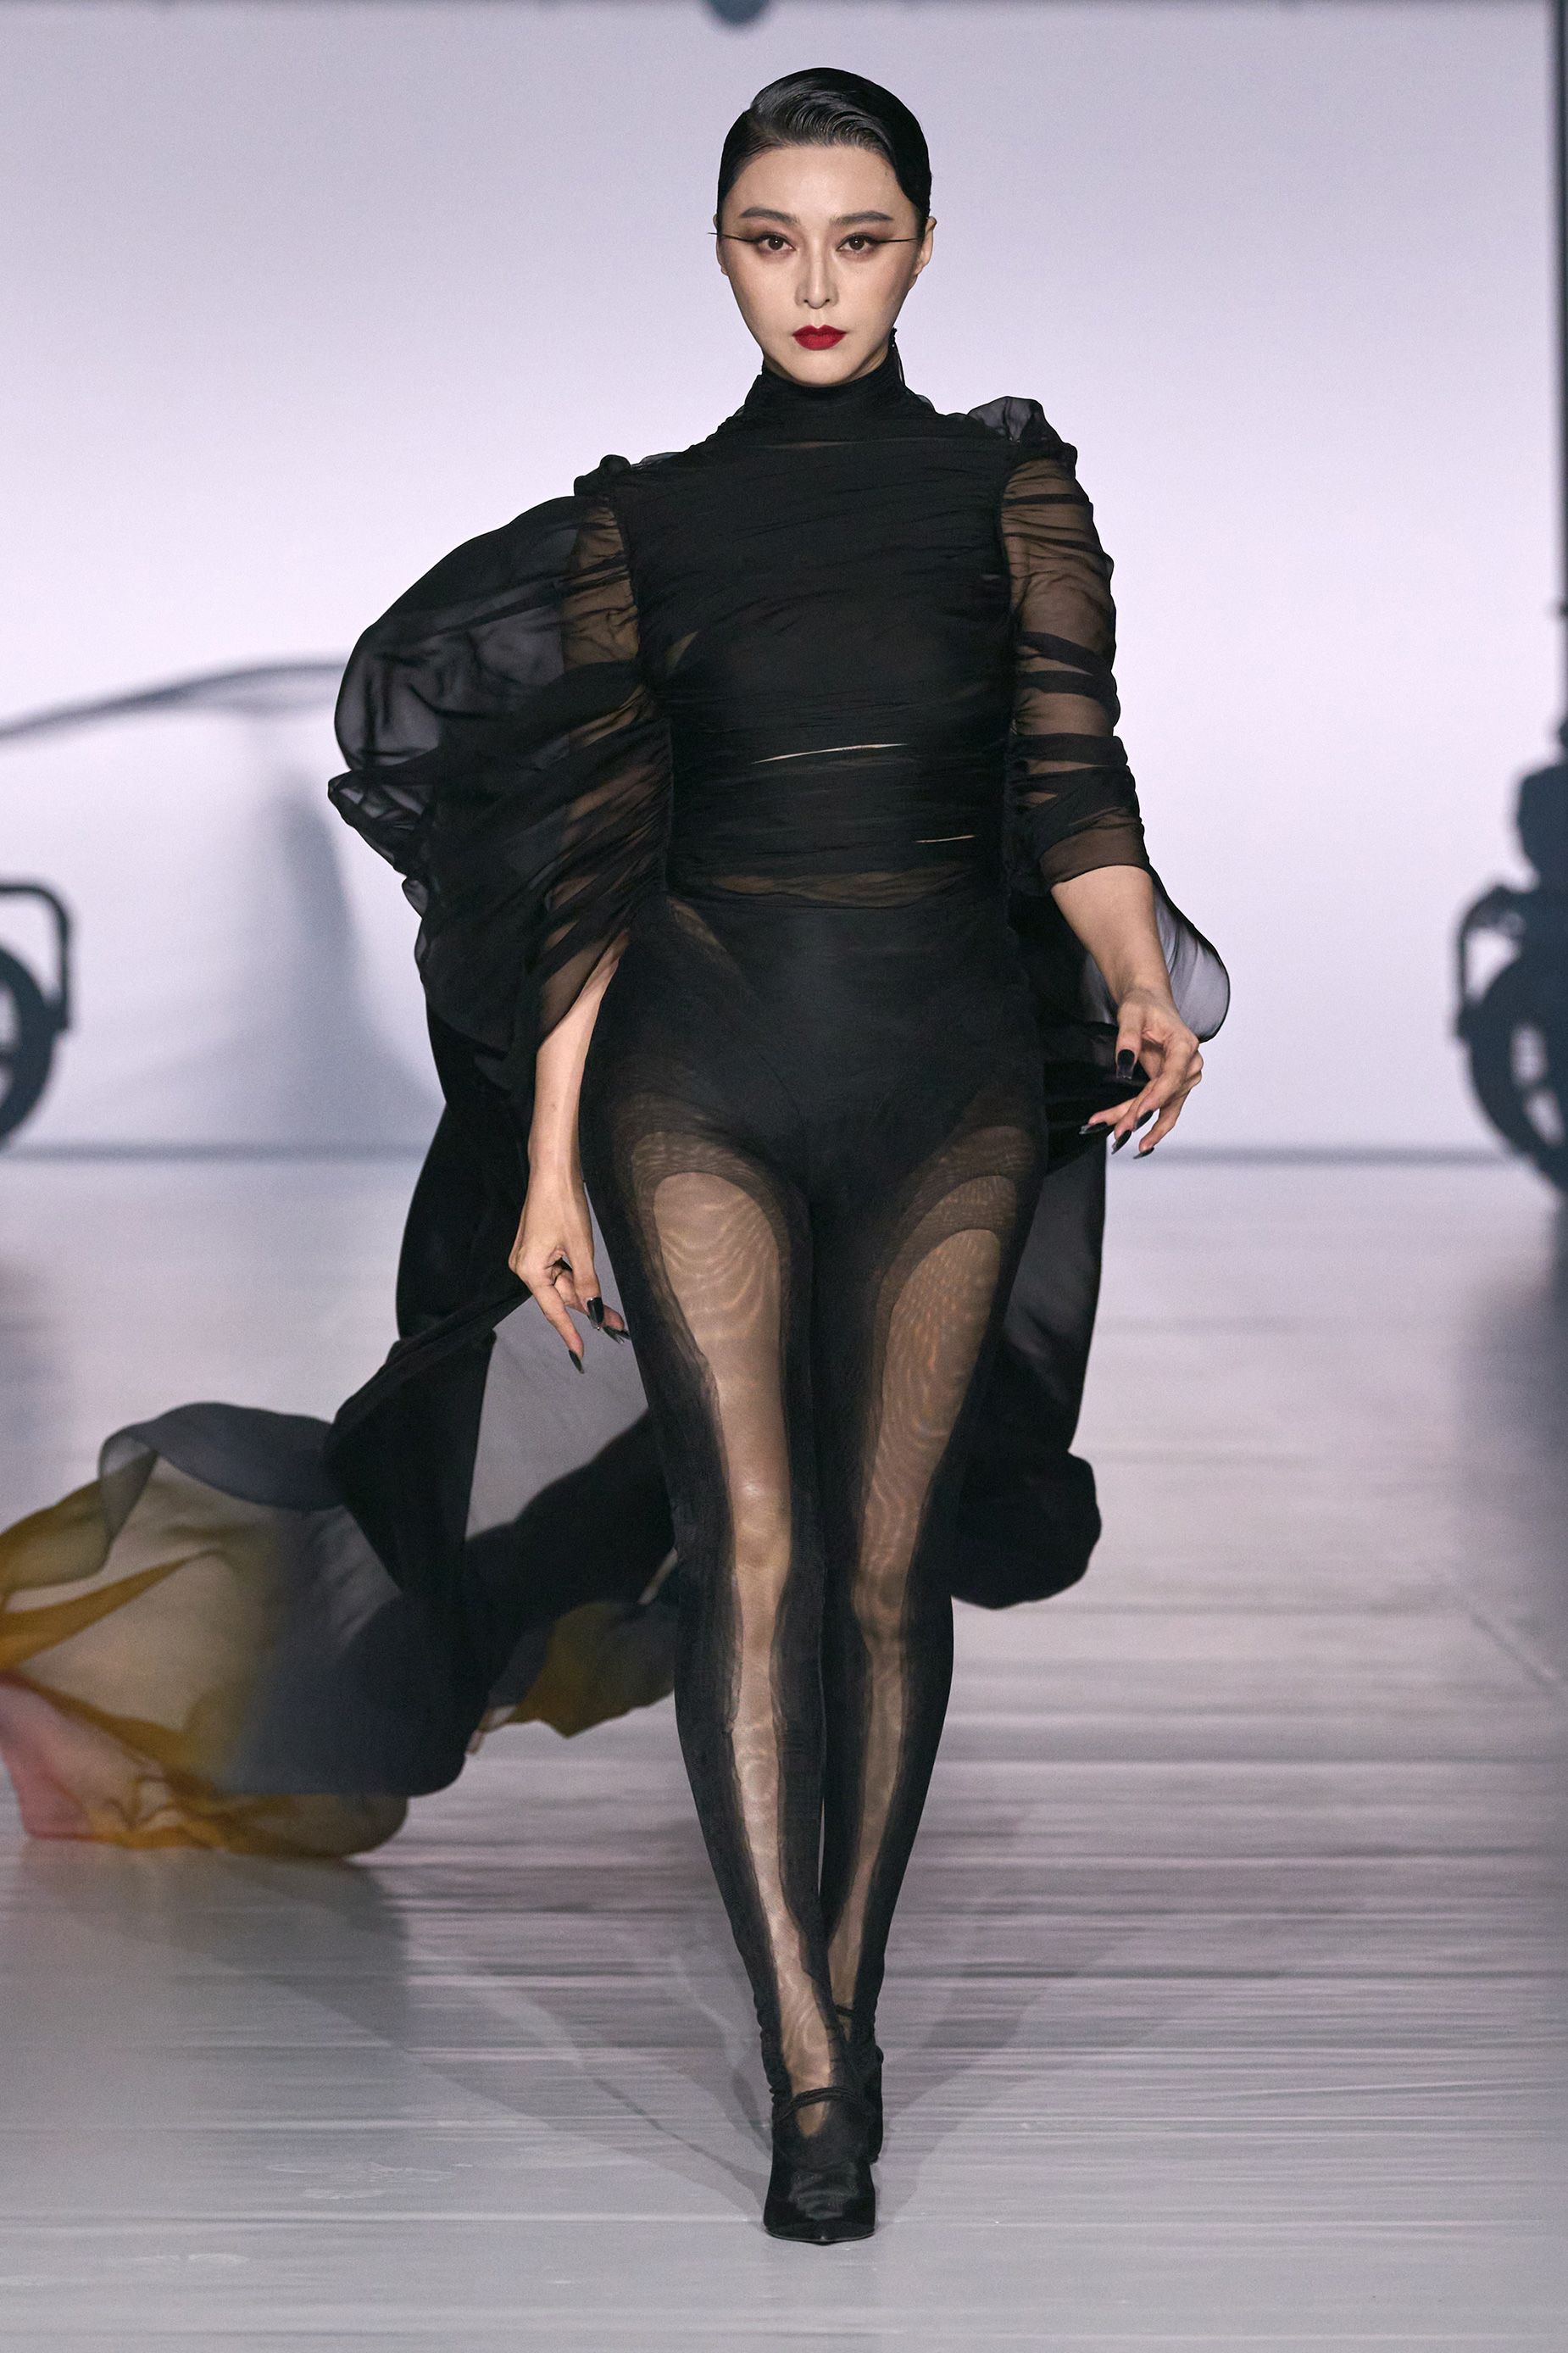 Chinese actor and red carpet mainstay Fan Bingbing took to the runway at Mugler.